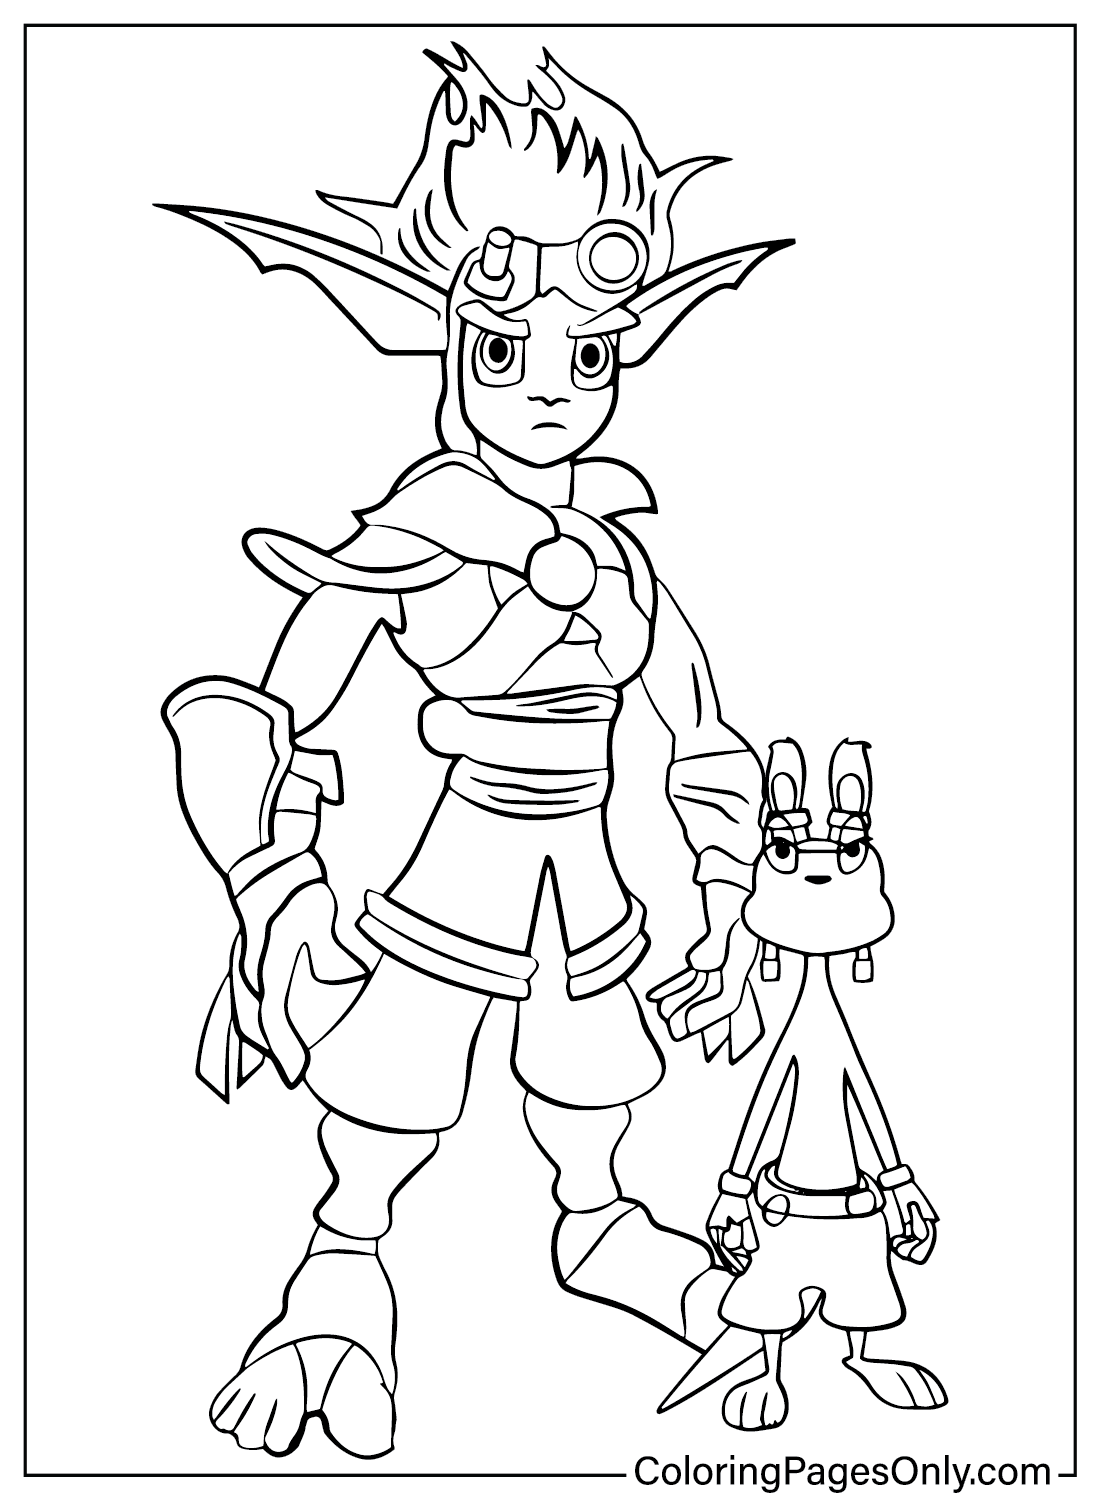 Jak and Daxter Coloring Sheet from Jak and Daxter